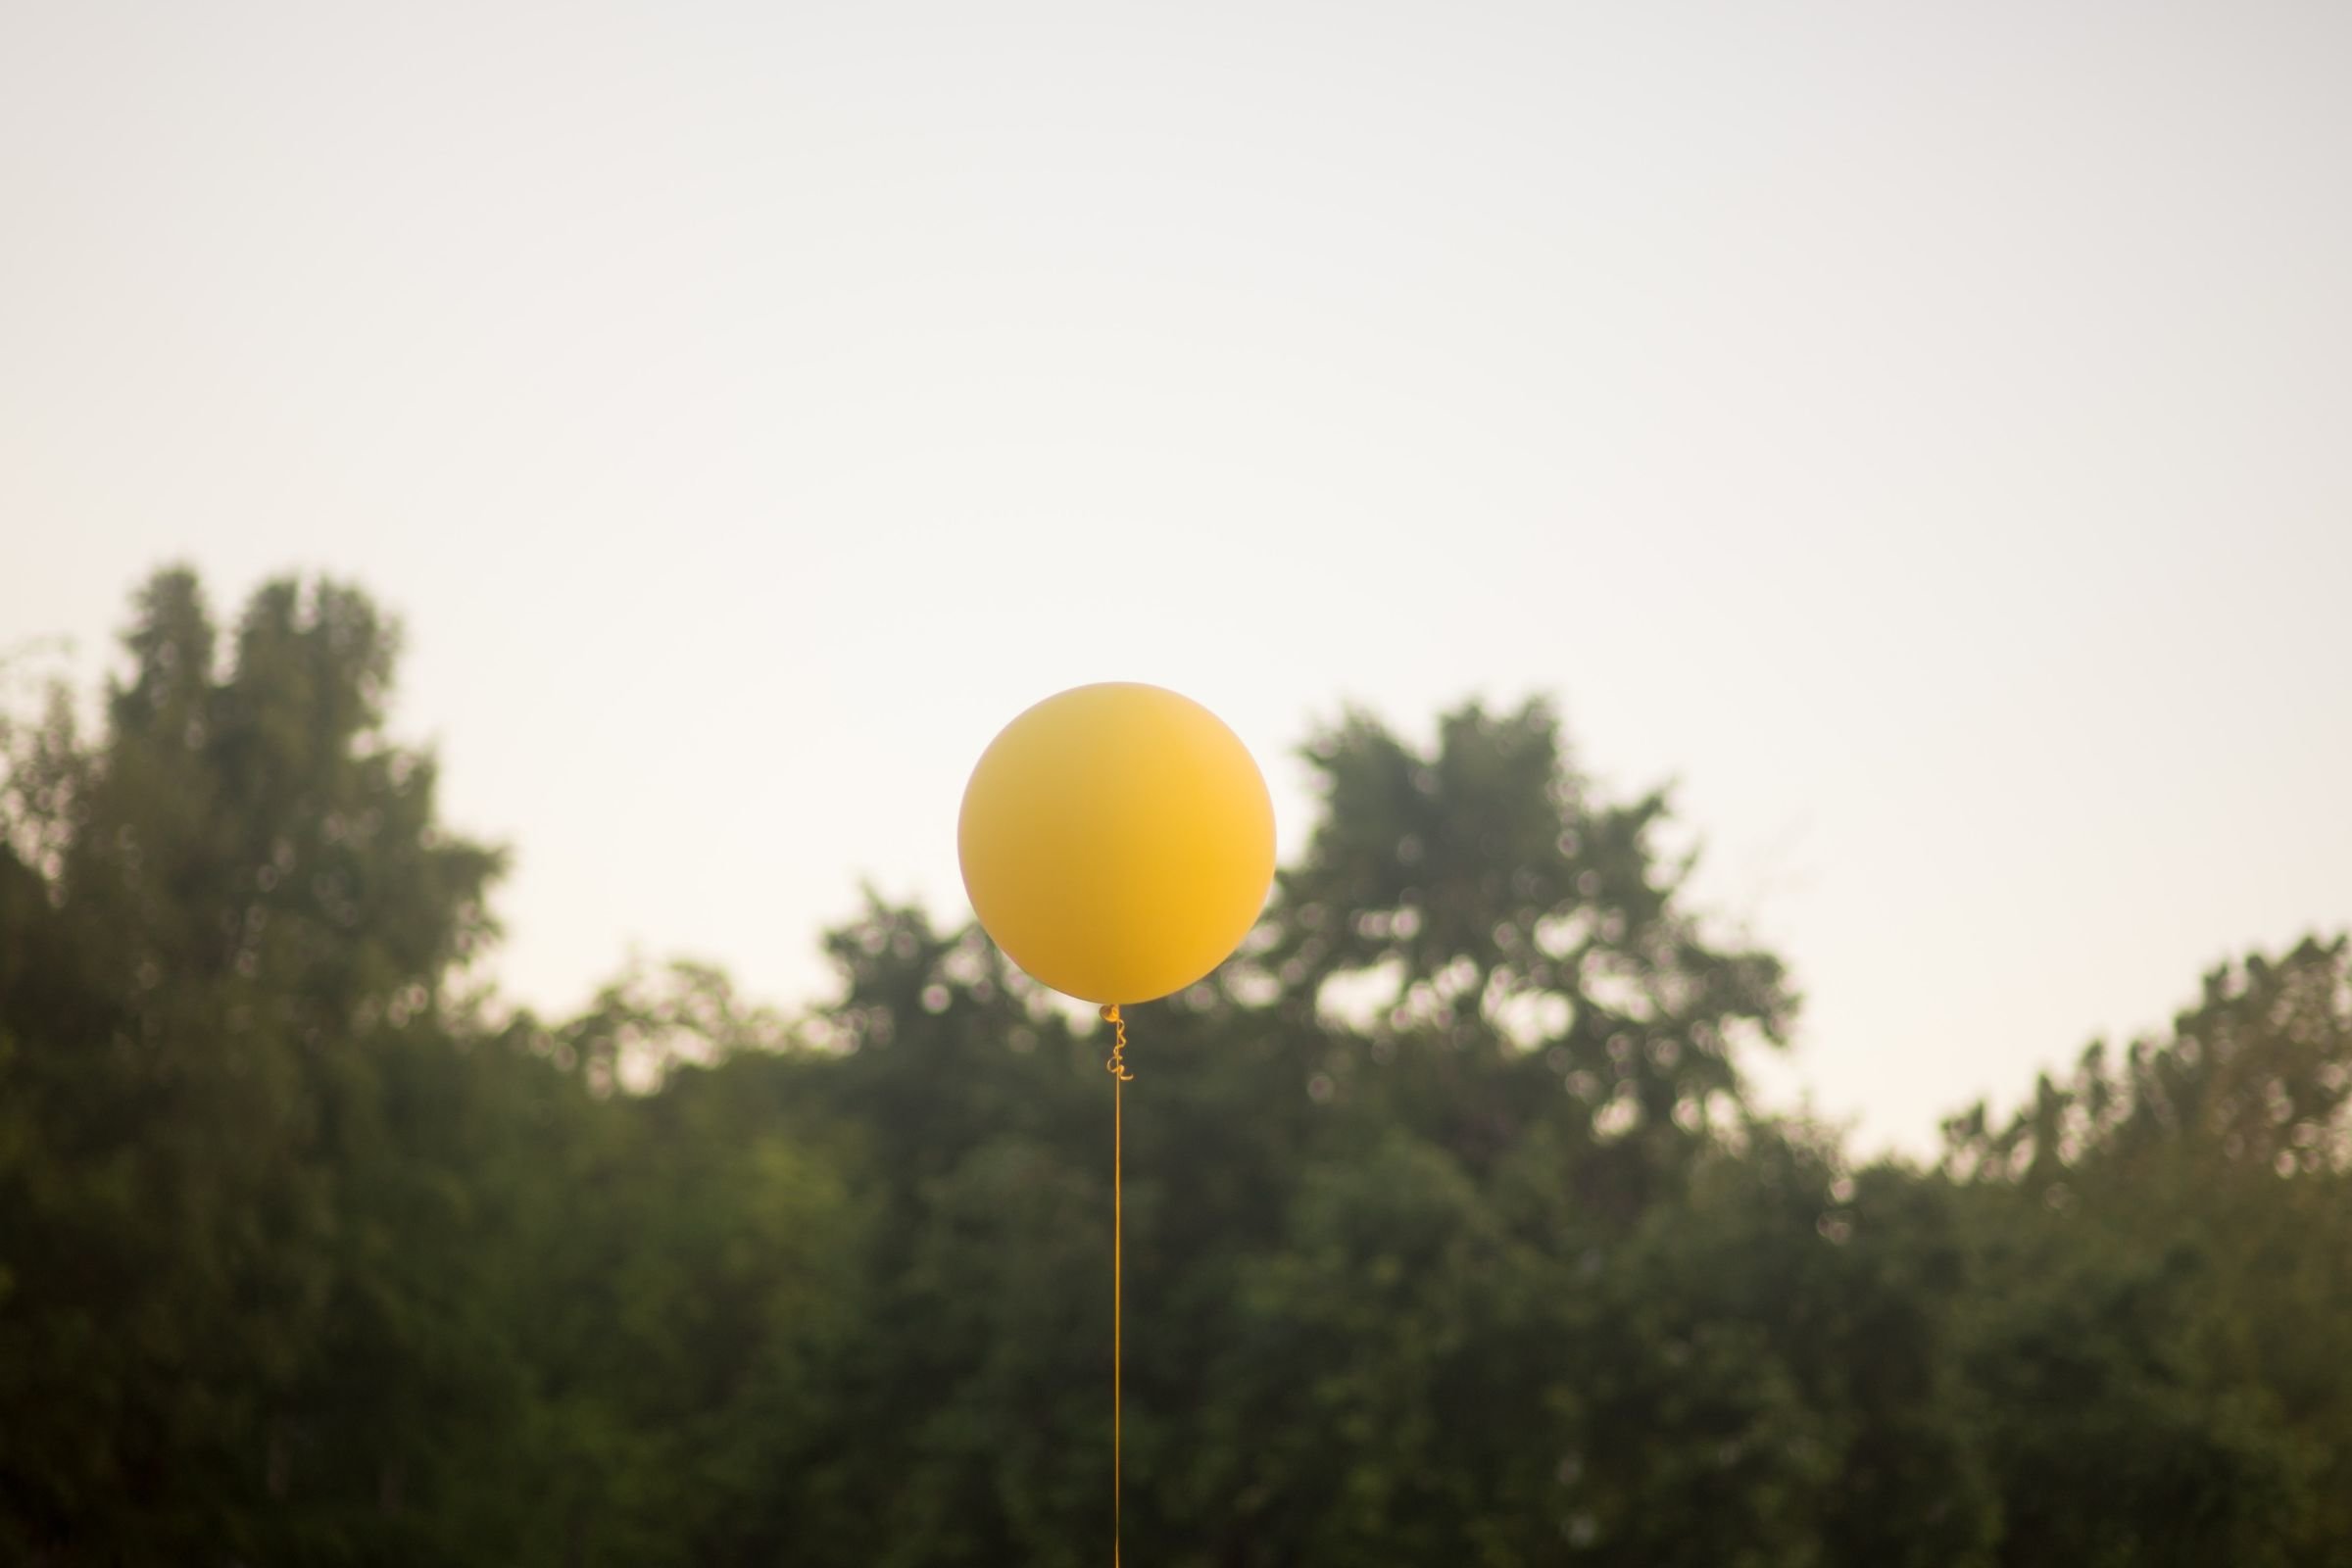 To grieve, or not to grieve (with balloons)? - that is the question 